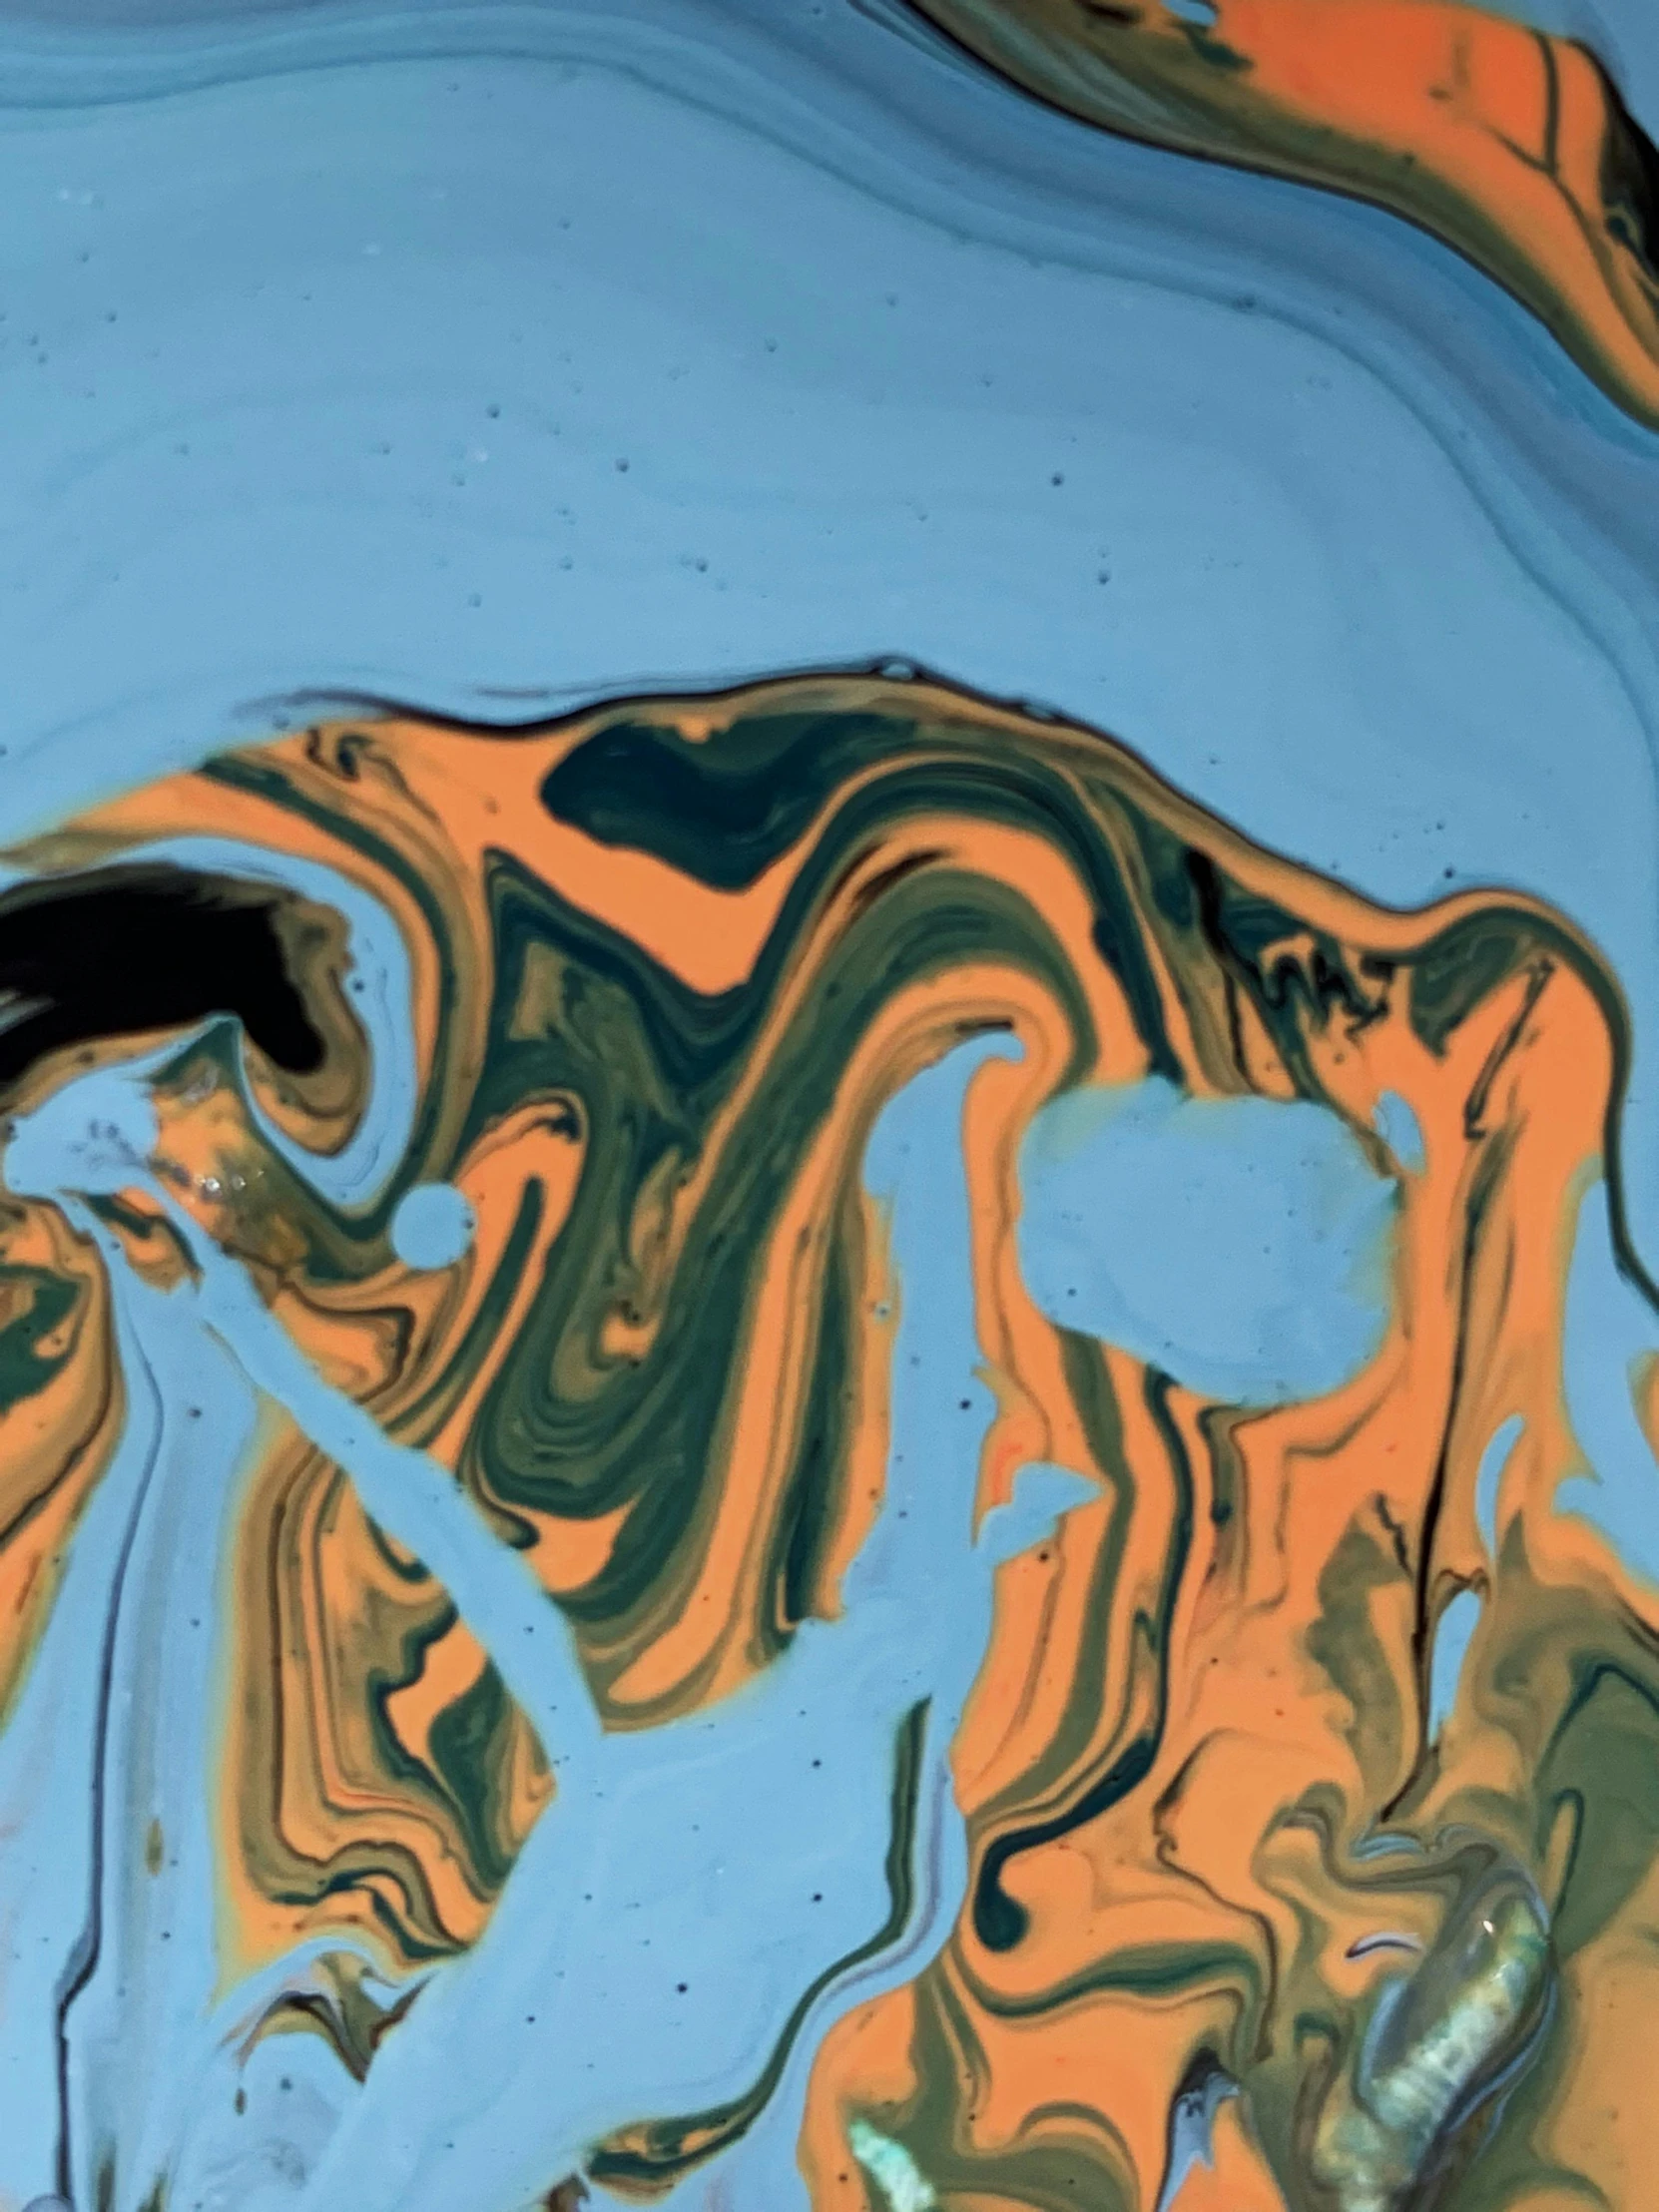 a close up of a painting of a person on a surfboard, trending on unsplash, action painting, marbled swirls, orange and blue color scheme, made of liquid, houdini algorithm generative art